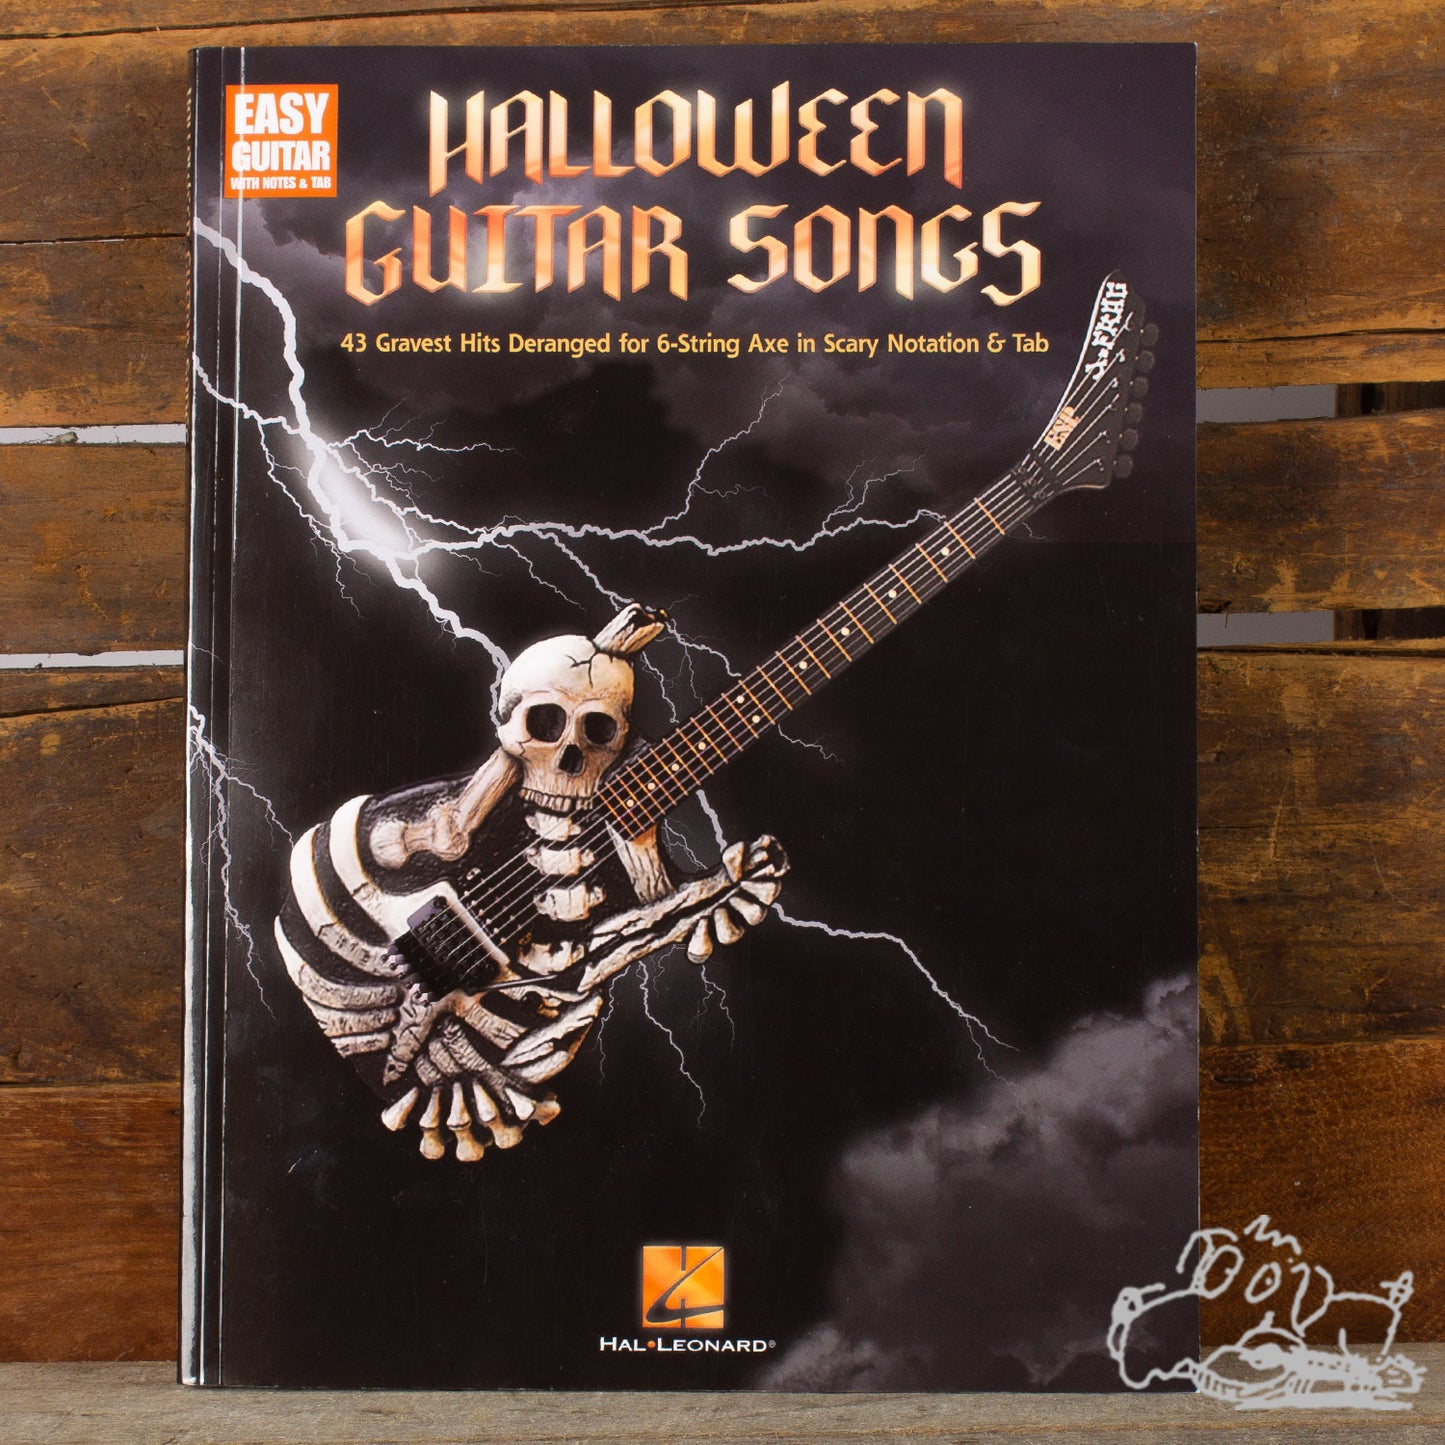 Halloween Guitar Songs: 43 Gravest Hits Deranged for 6-String Axe in Scary Notation & Tab